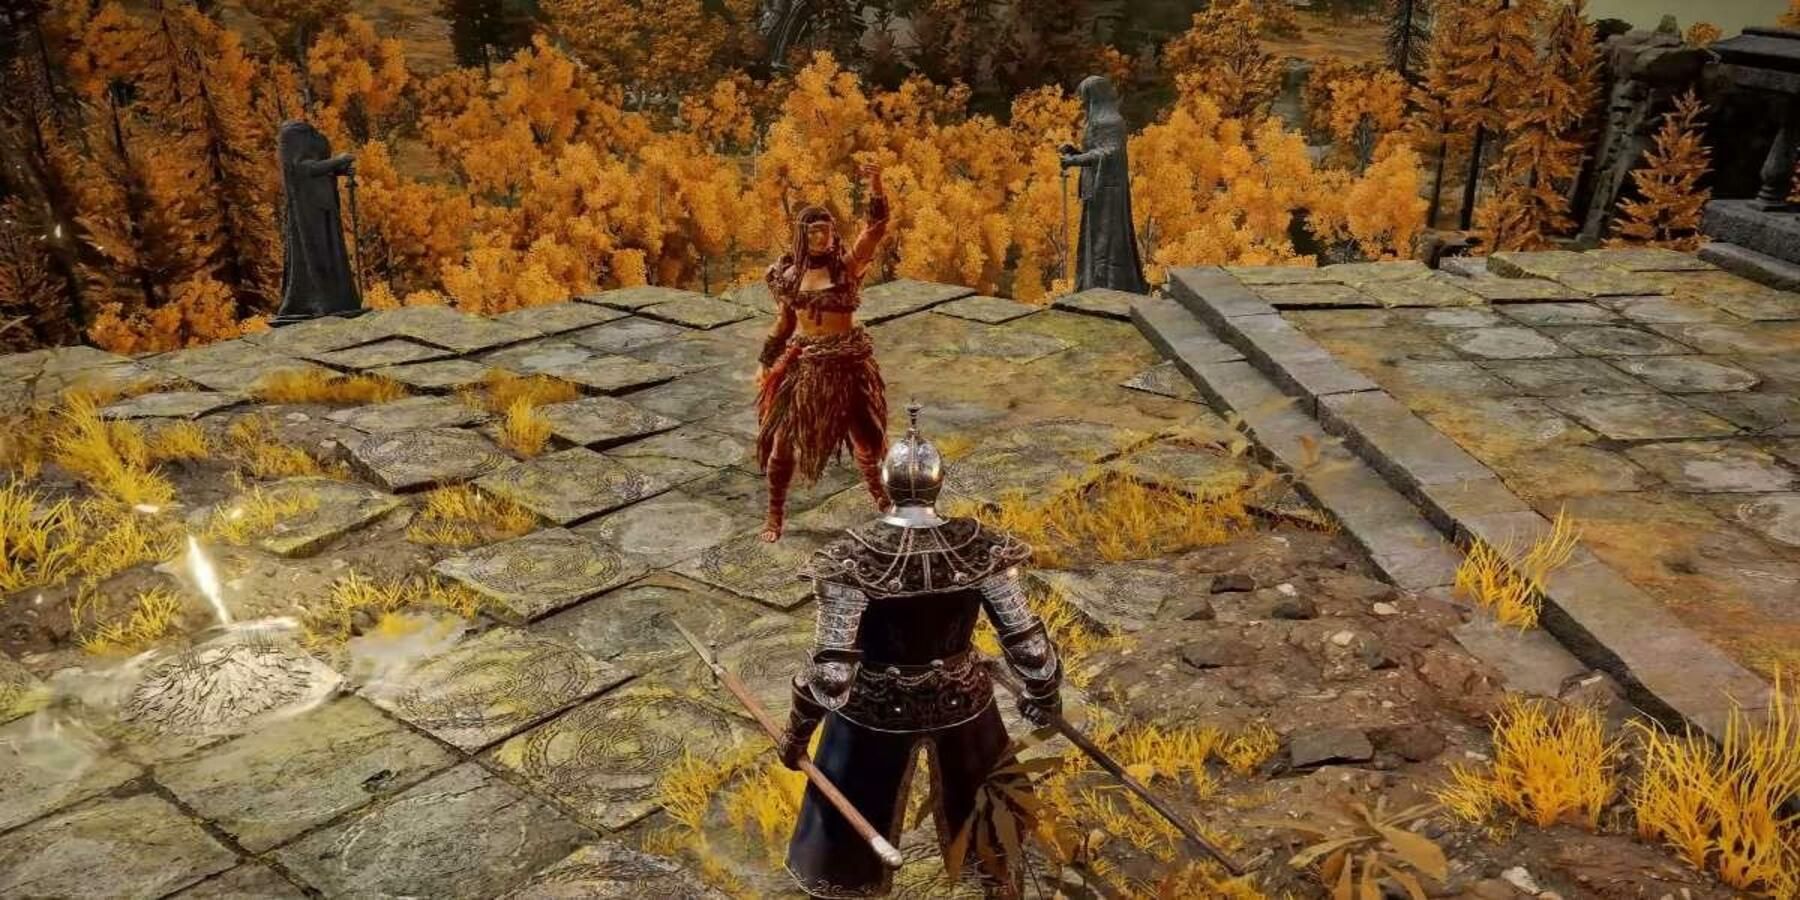 Funny Elden Ring Clip Shows PvP Fight Ending When Player ‘Stabs Themselves’